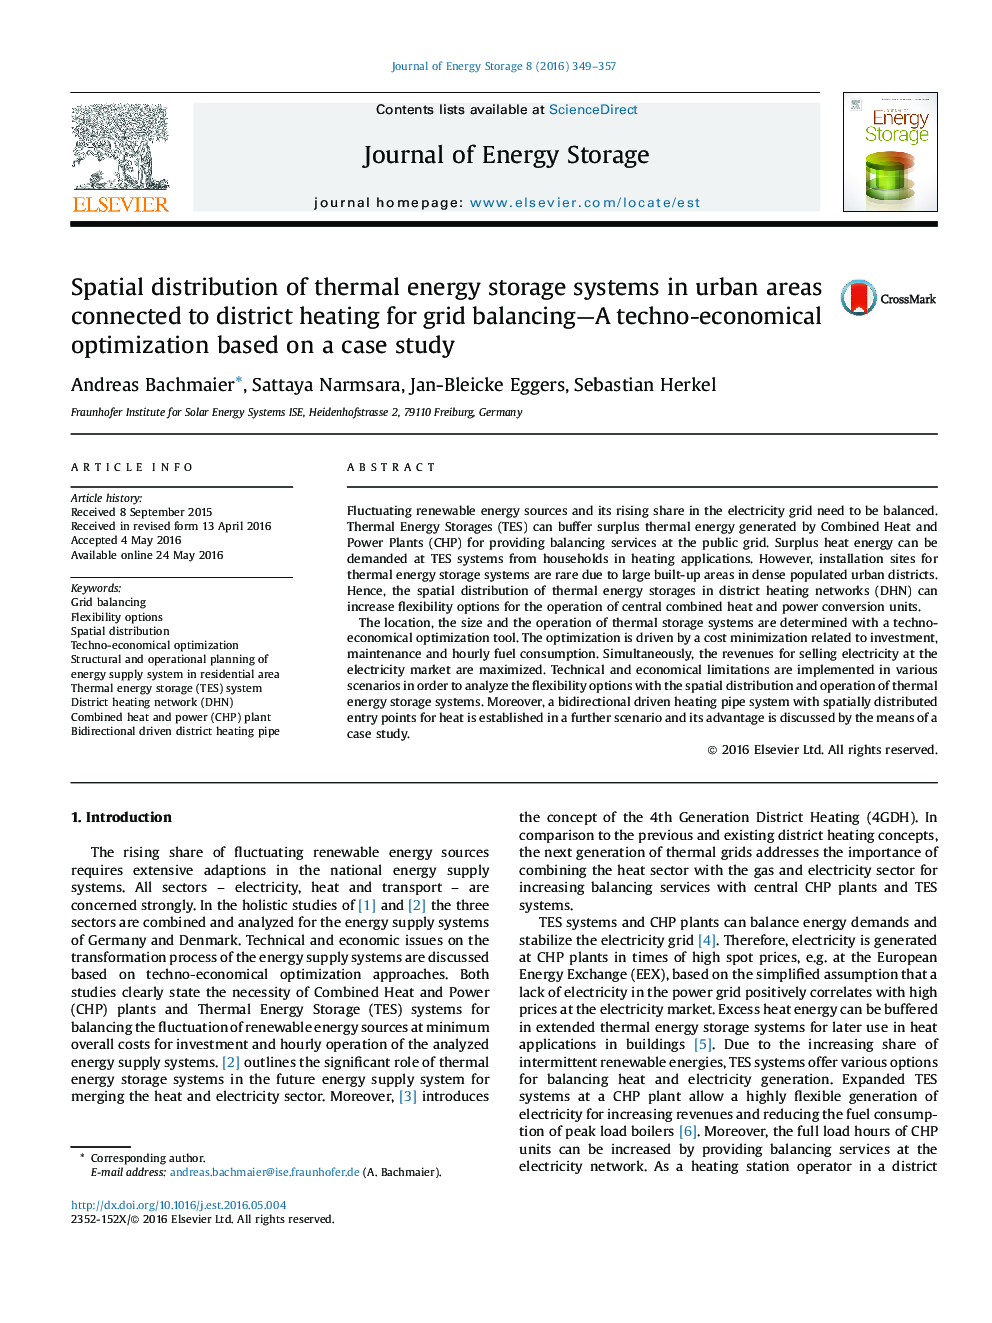 Spatial distribution of thermal energy storage systems in urban areas connected to district heating for grid balancing-A techno-economical optimization based on a case study